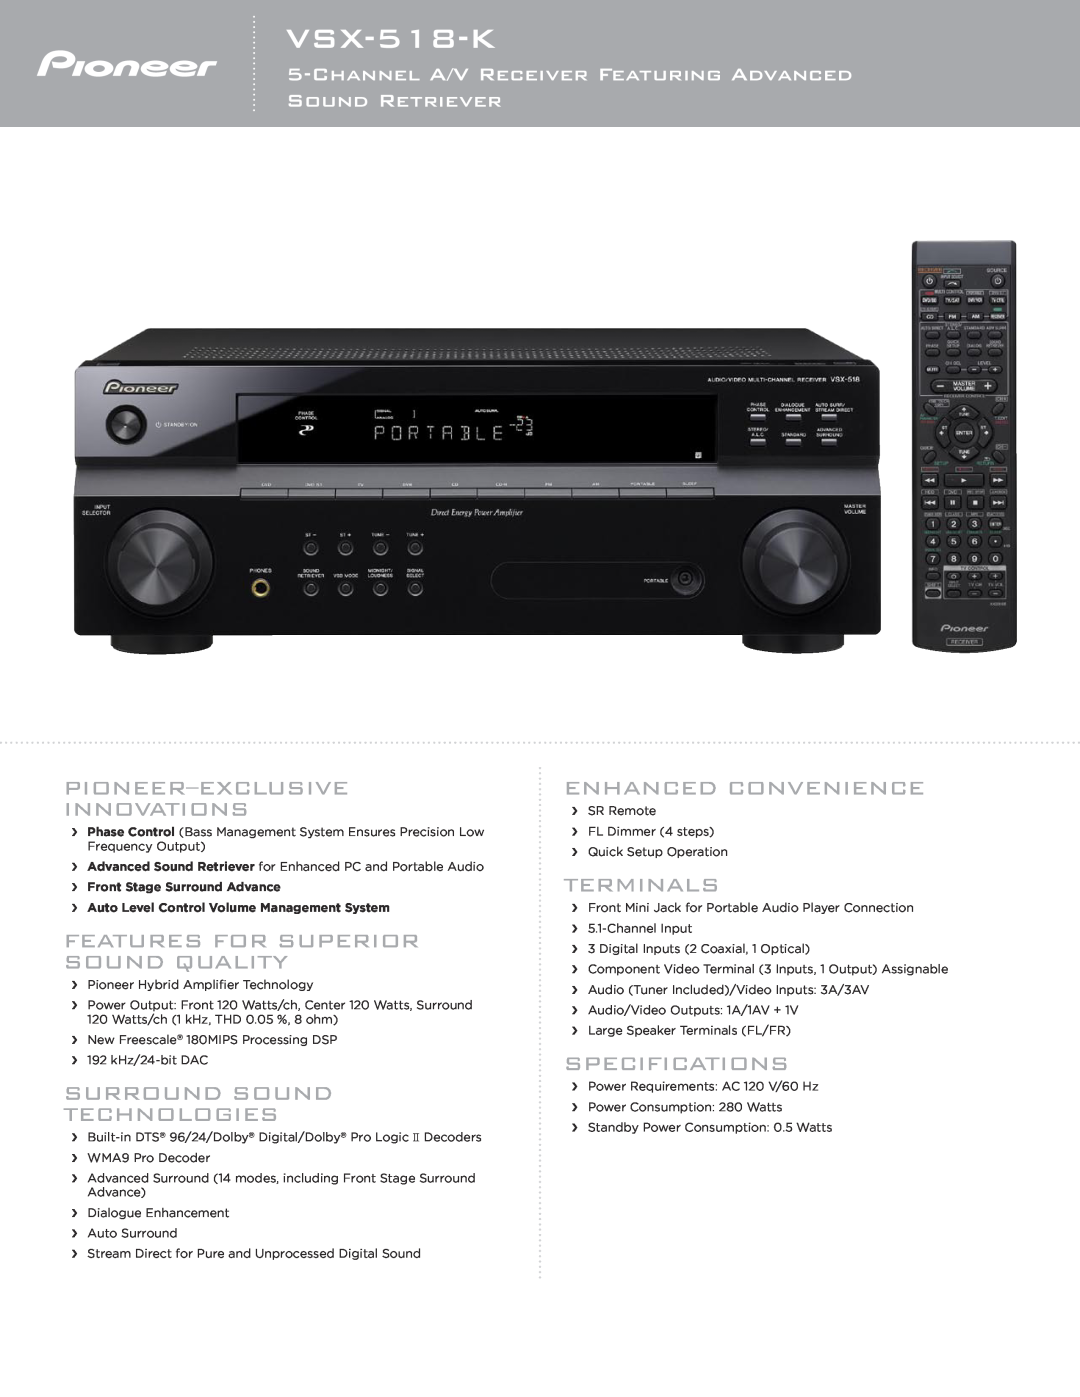 Pioneer VSX-518-K specifications Pioneer-Exclusive Innovations, Features For Superior Sound Quality, Enhanced Convenience 